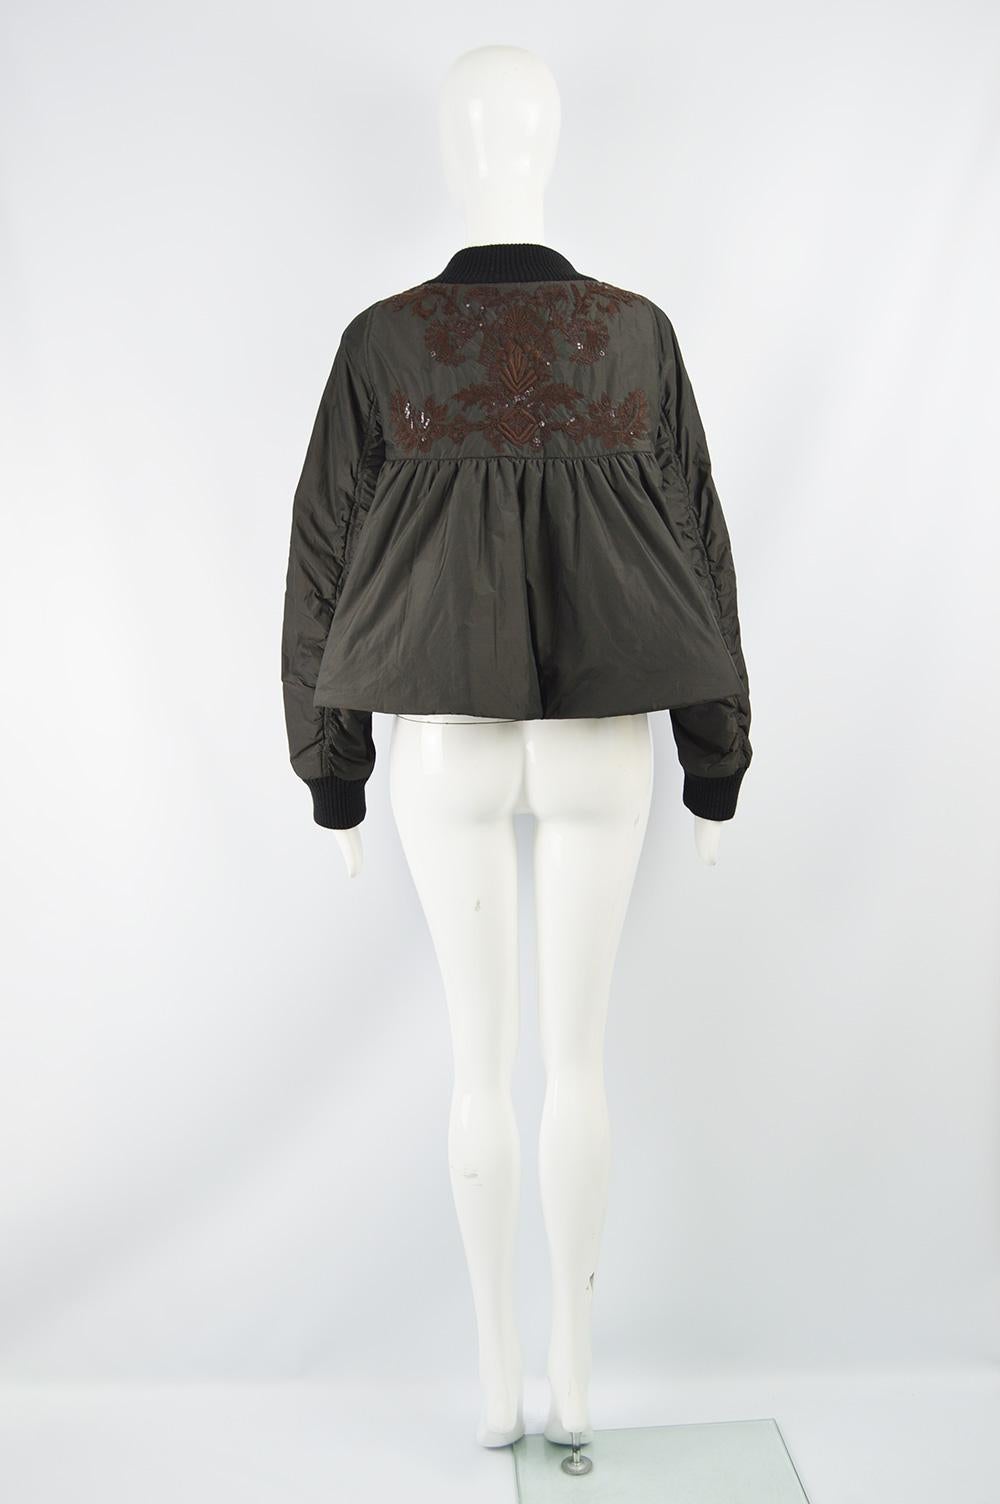 Dries Van Noten Architectural Fan Back Embroidered & Sequinned Bomber Jacket 3